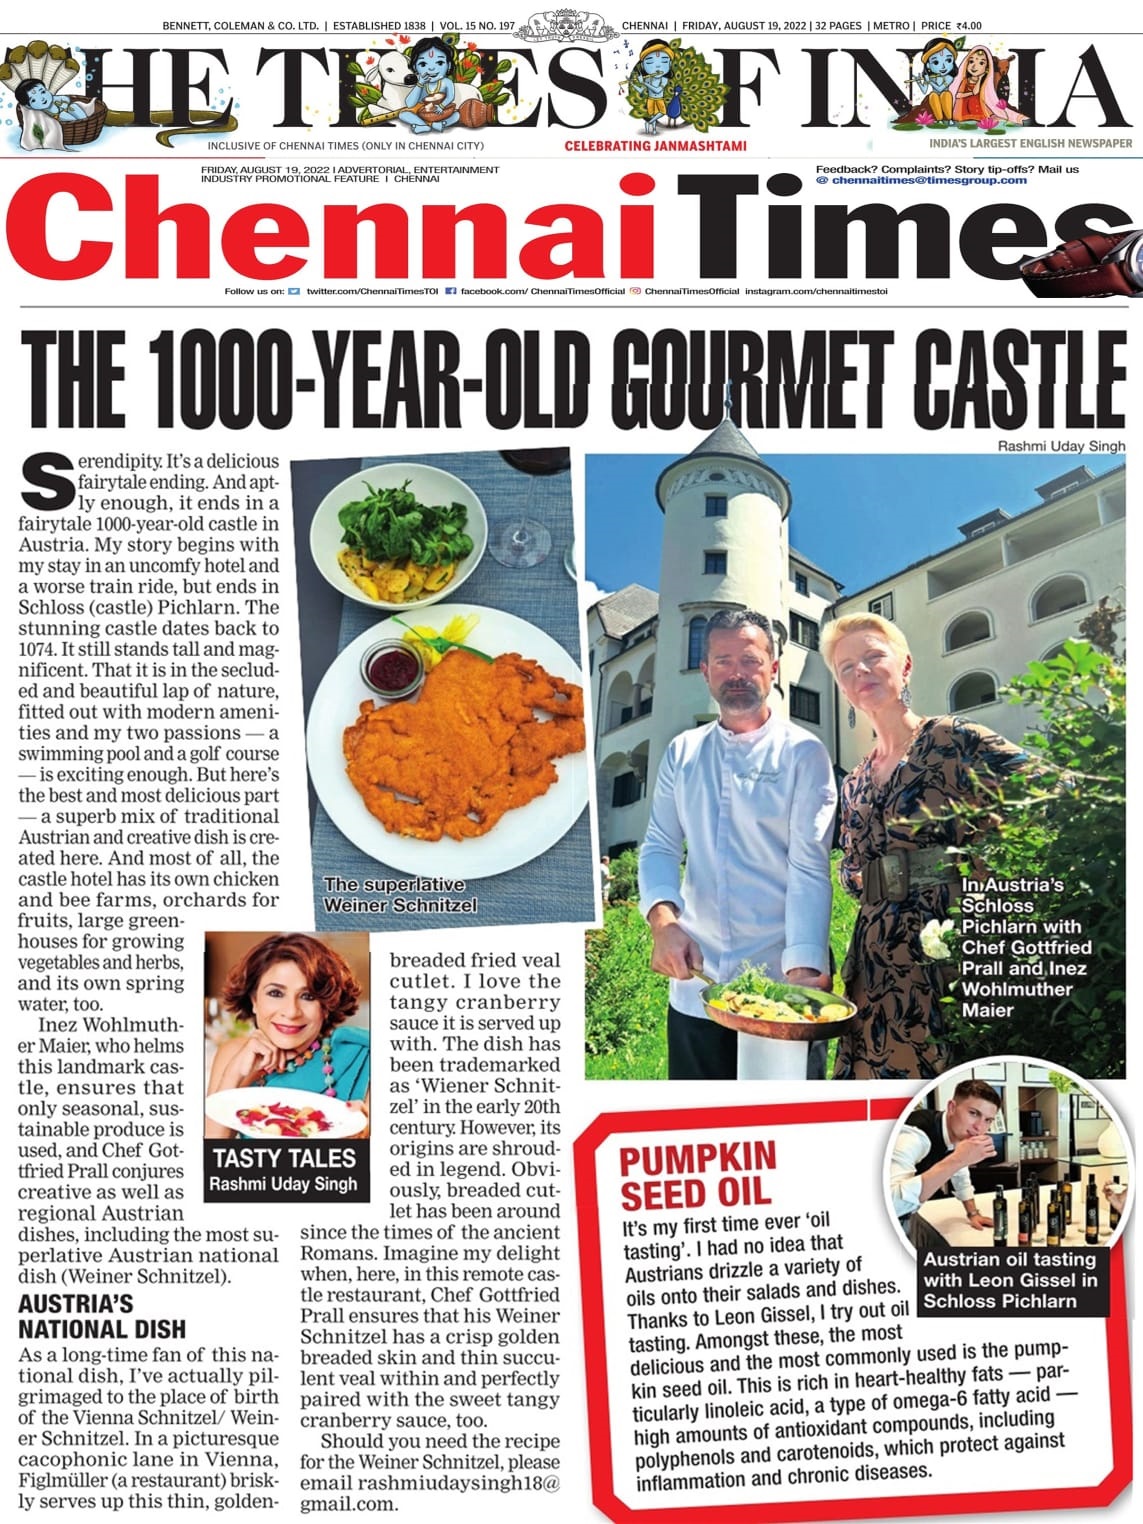 The 100-Year-Old Gourmet Castle